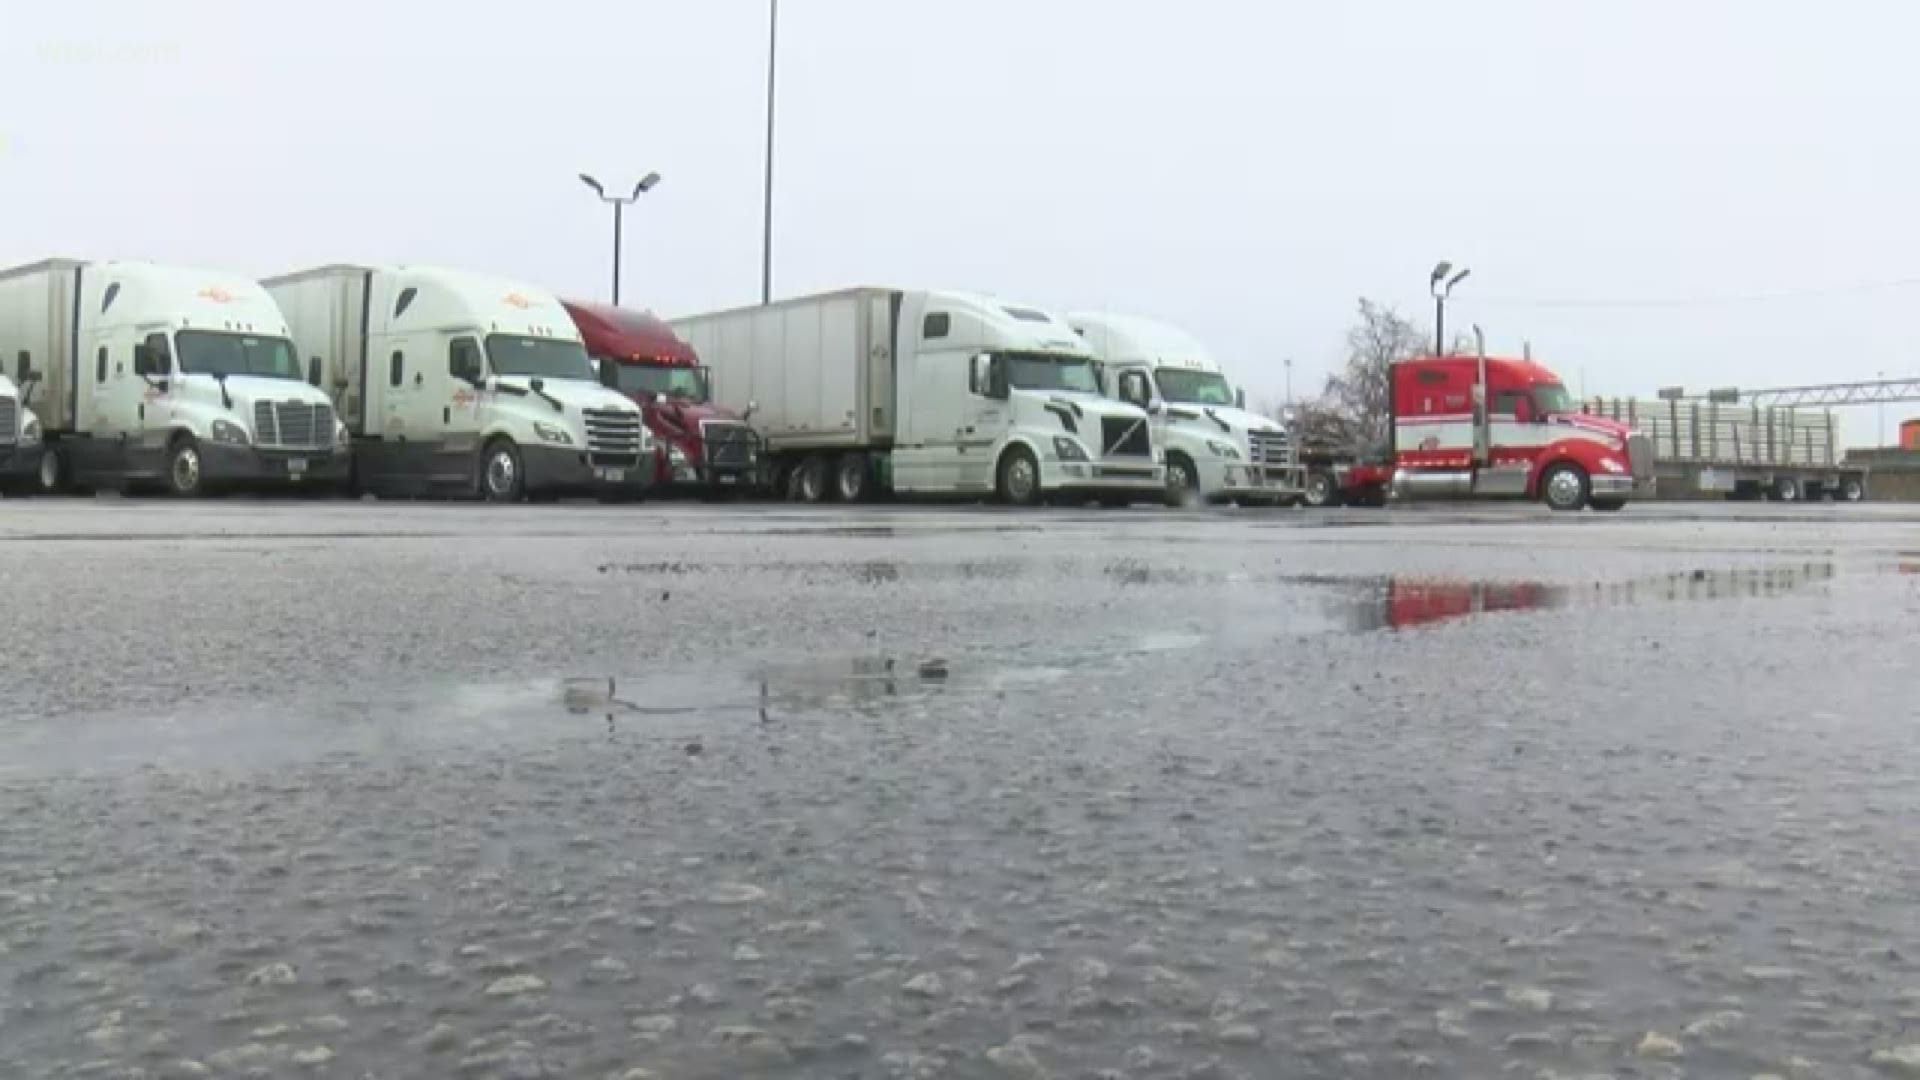 Truck drivers say it has become hard for them to find a place to eat, park or buy essentials for themselves.